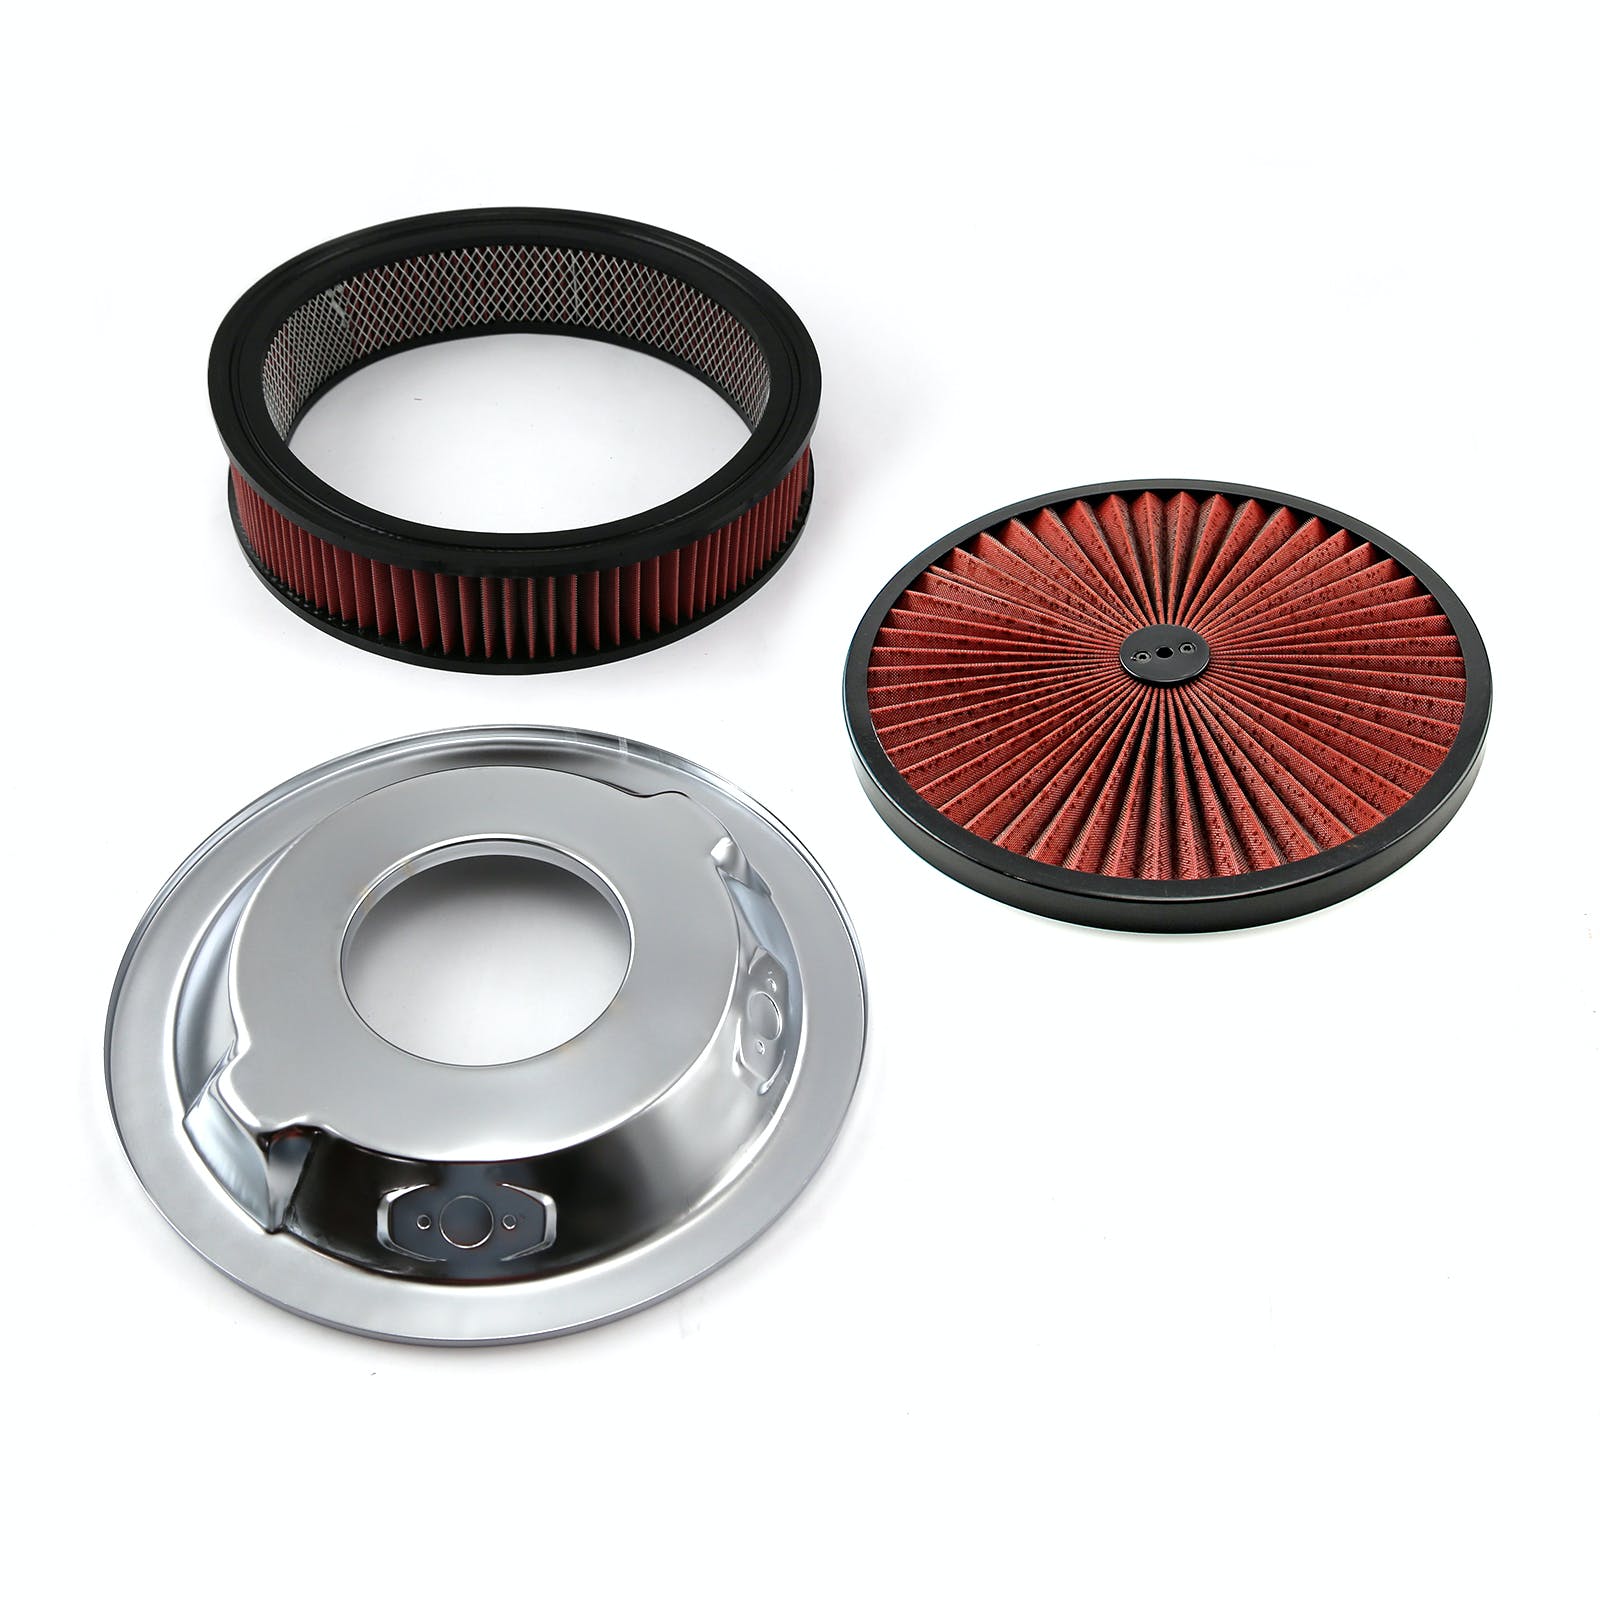 Speedmaster PCE104.1027 14 x 3 Washable Element Extreme Top w/Blk Ring Dropped Base Air Cleaner Kit